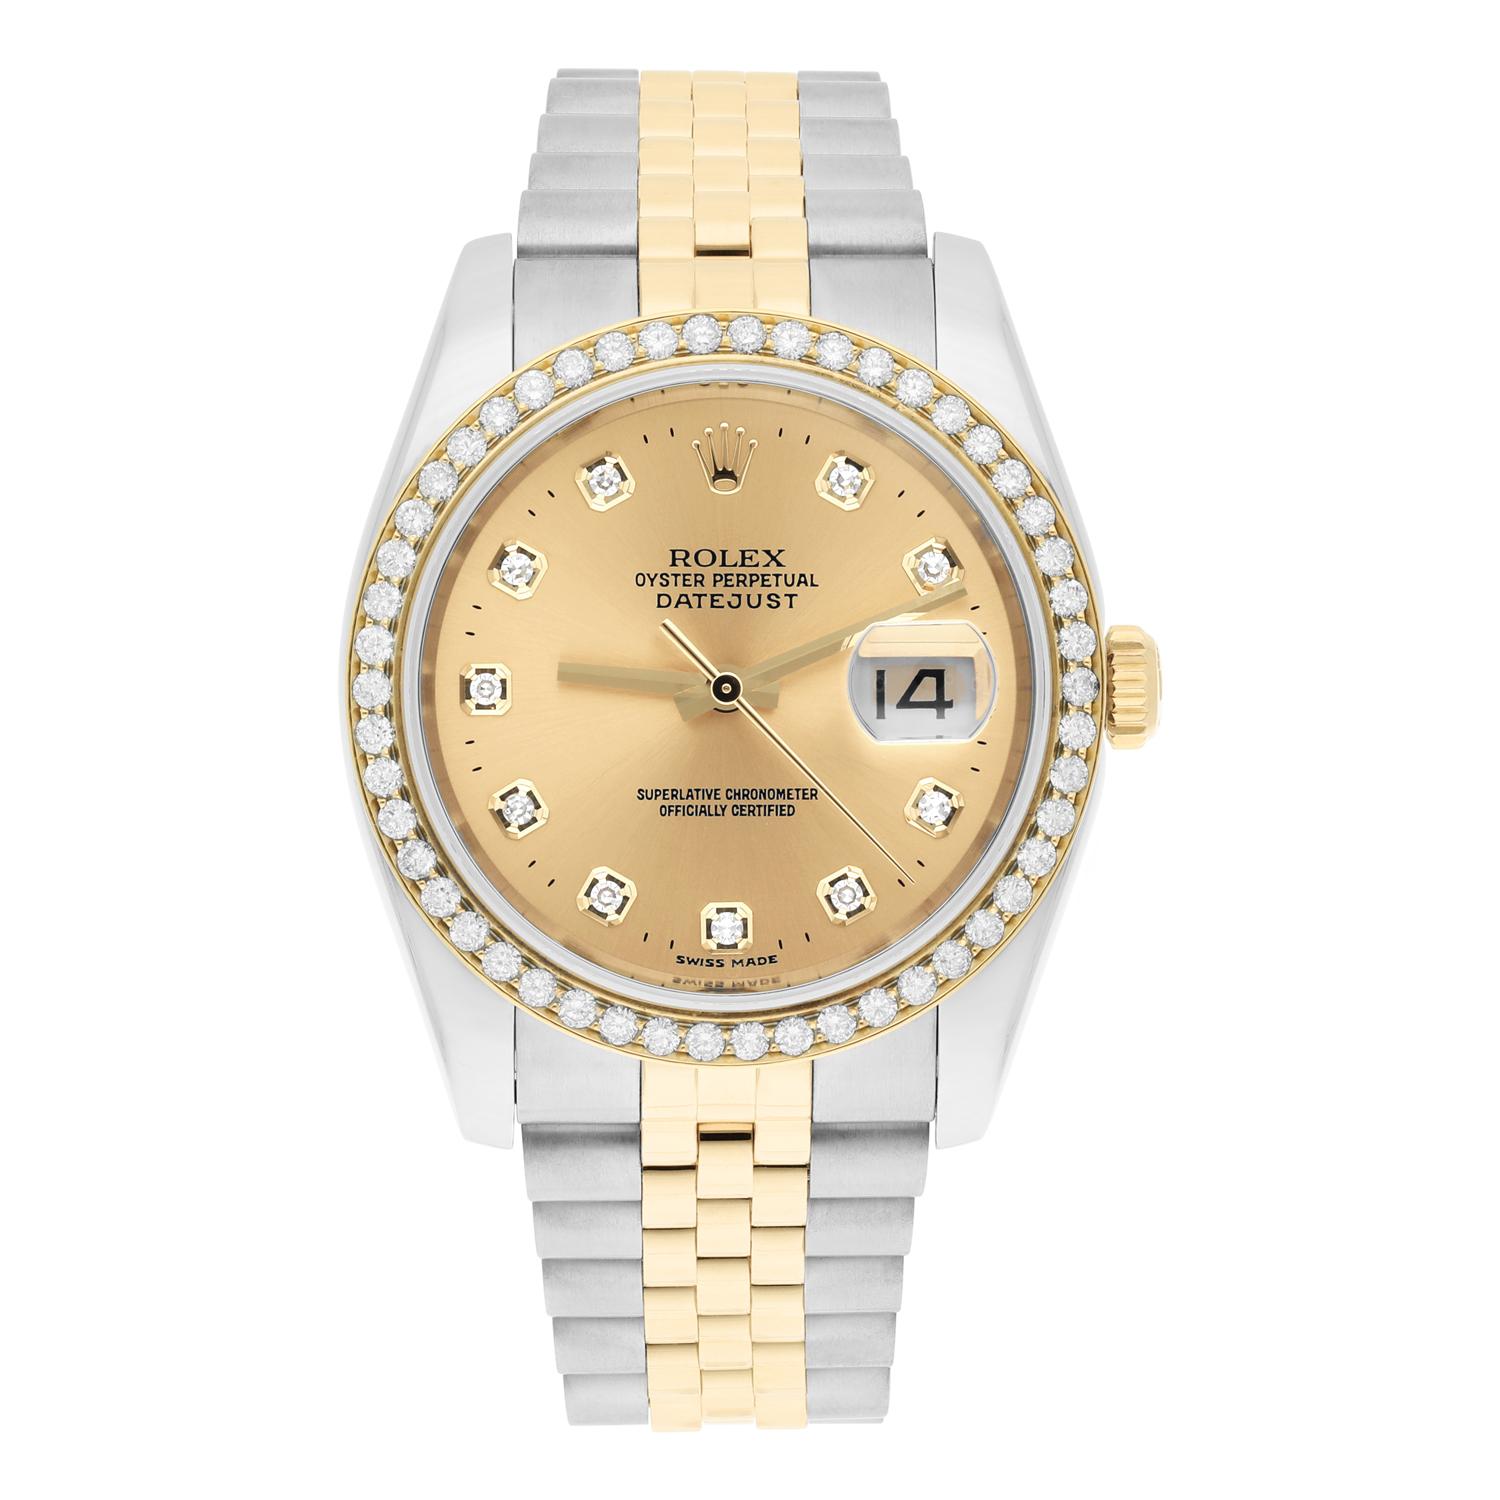 Rolex Datejust 36 Gold & Steel 116233 Watch Factory Champagne Diamond Dial Custom Diamond Bezel Jubilee Bracelet Two Tone Watch

This watch has been professionally polished, serviced and is in excellent overall condition. There are absolutely no